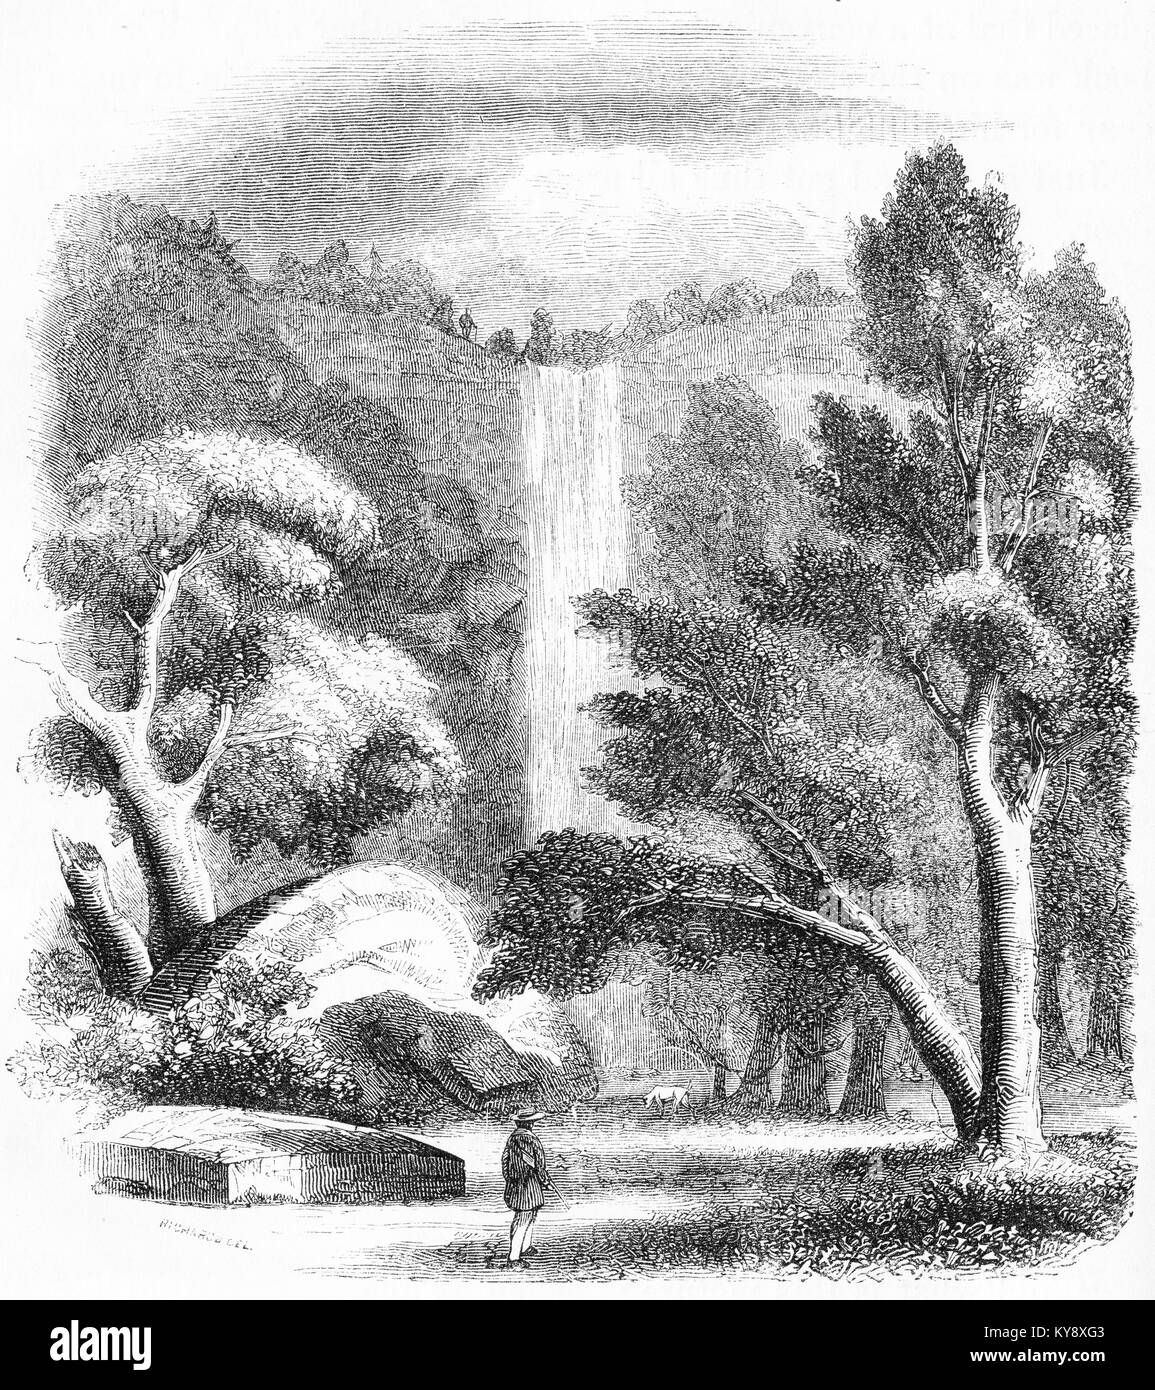 Engraving of a high waterfall. From an original engraving in the Harper's Story Books by Jacob Abbott, 1854. Stock Photo